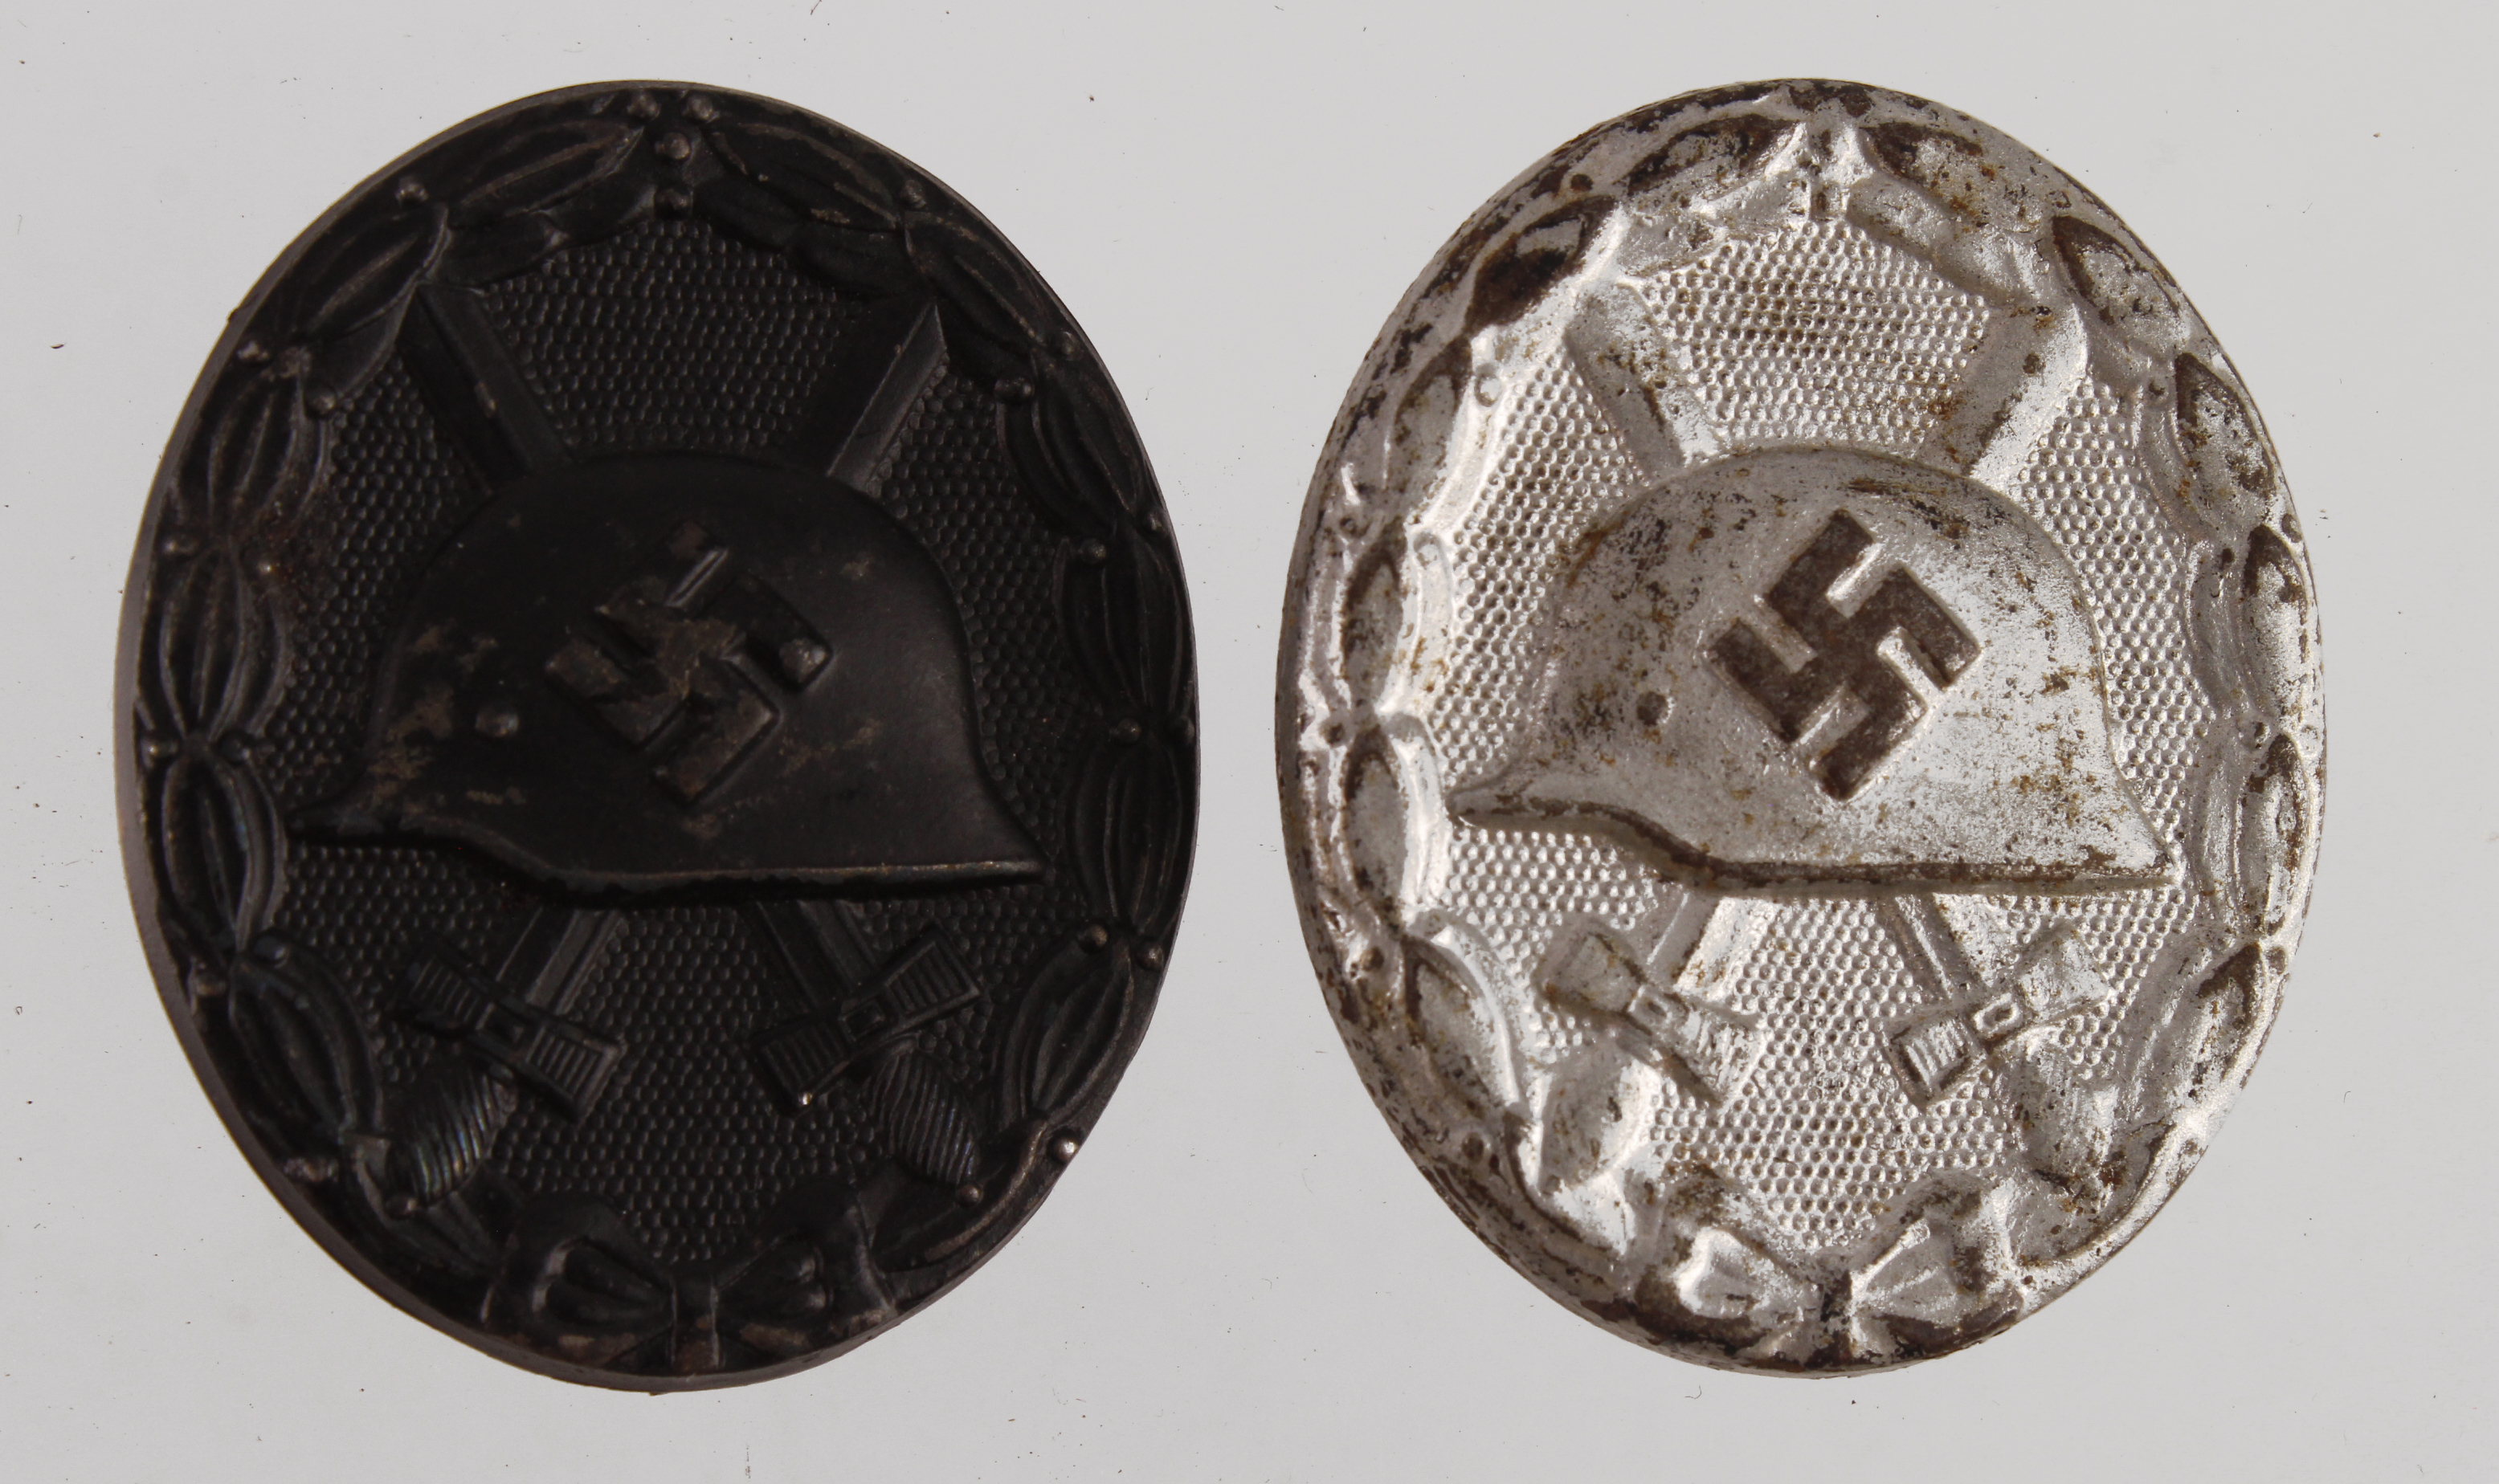 Germany from a one owner collection, two wounds badges, black and silver, lightweight.